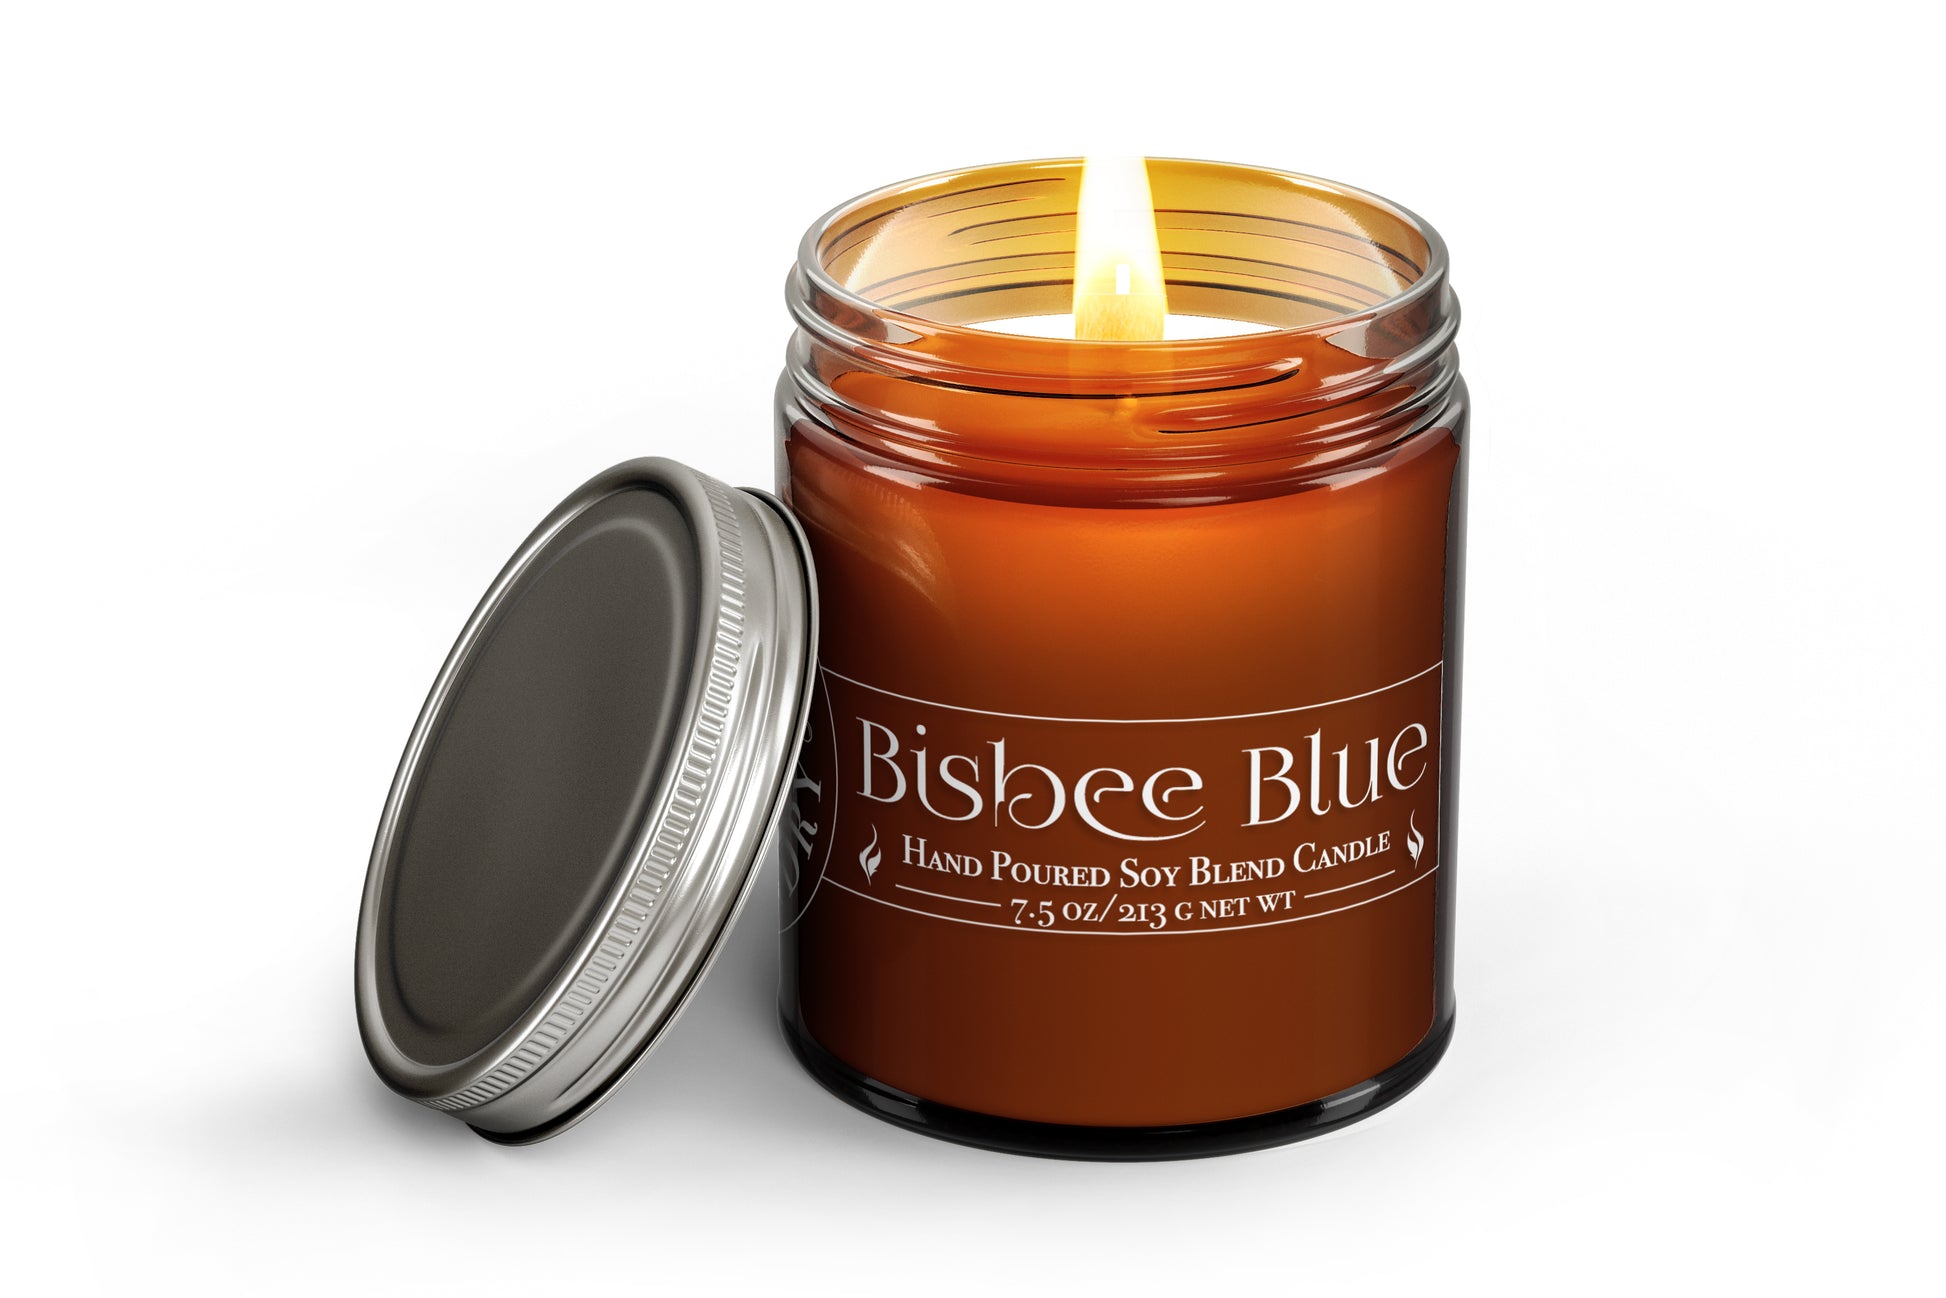 Bisbee Blue Candle